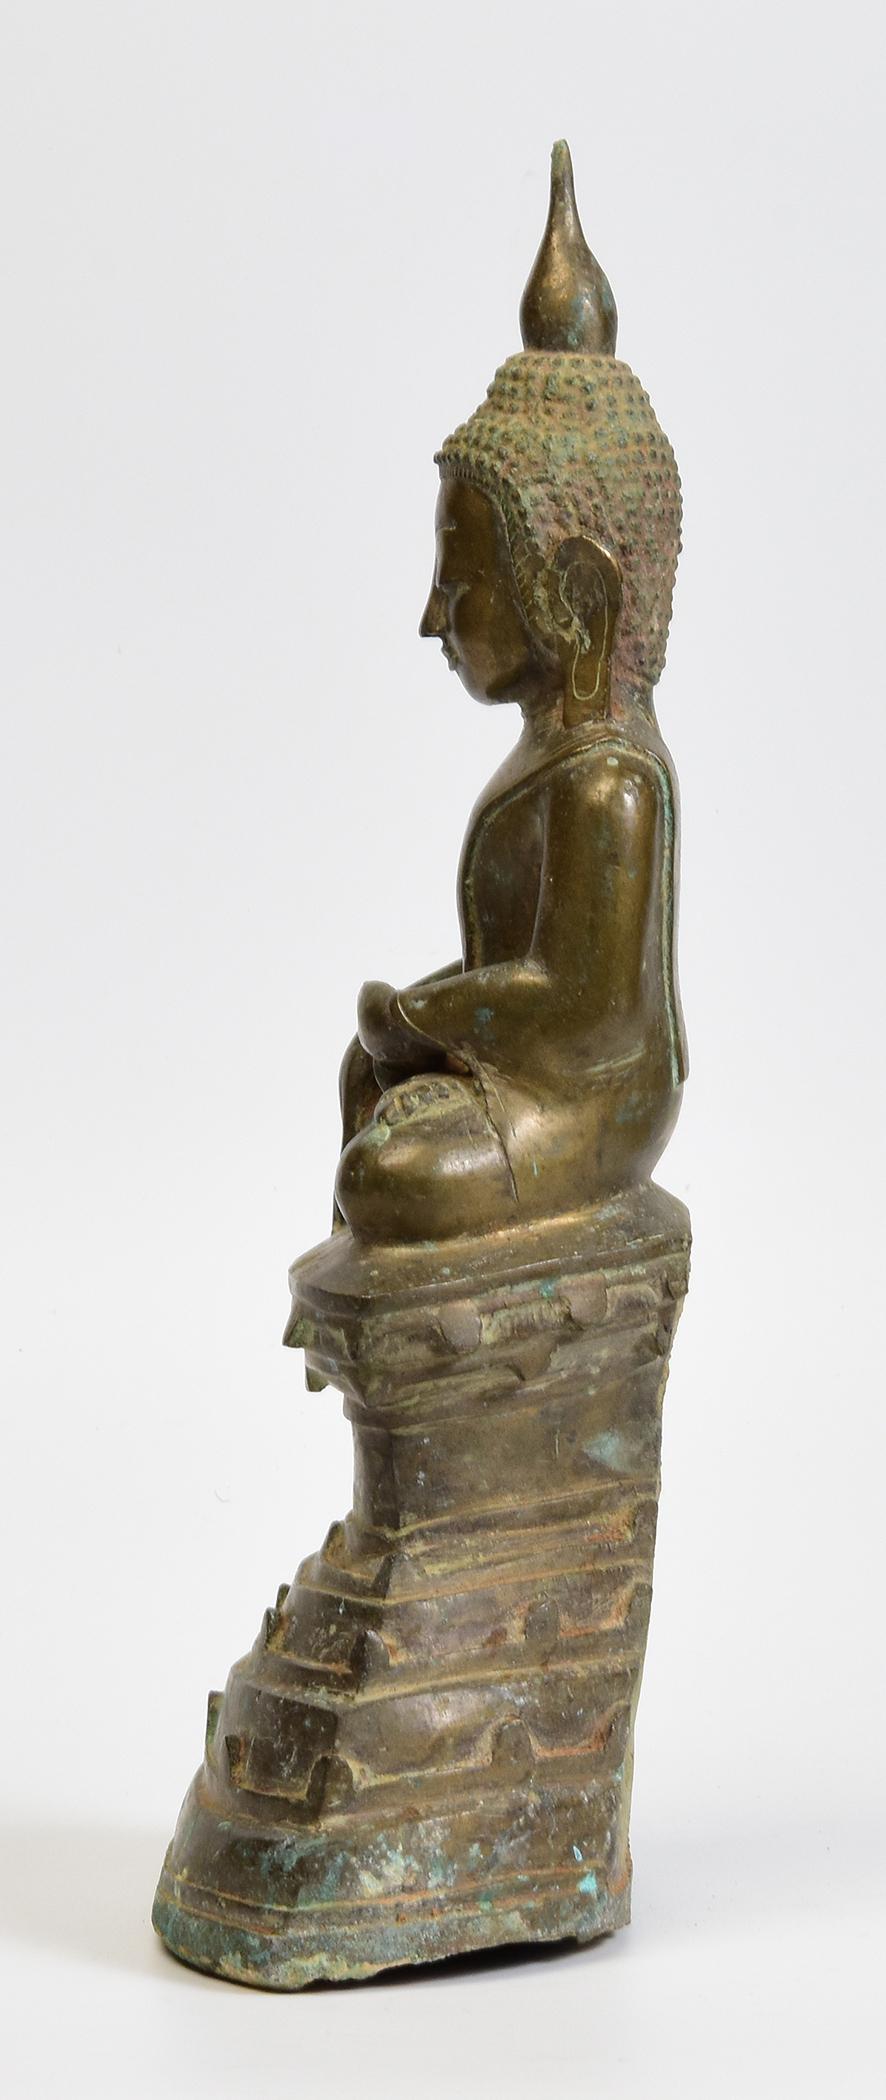 17th Century, Early Shan, Antique Burmese Bronze Seated Buddha For Sale 3